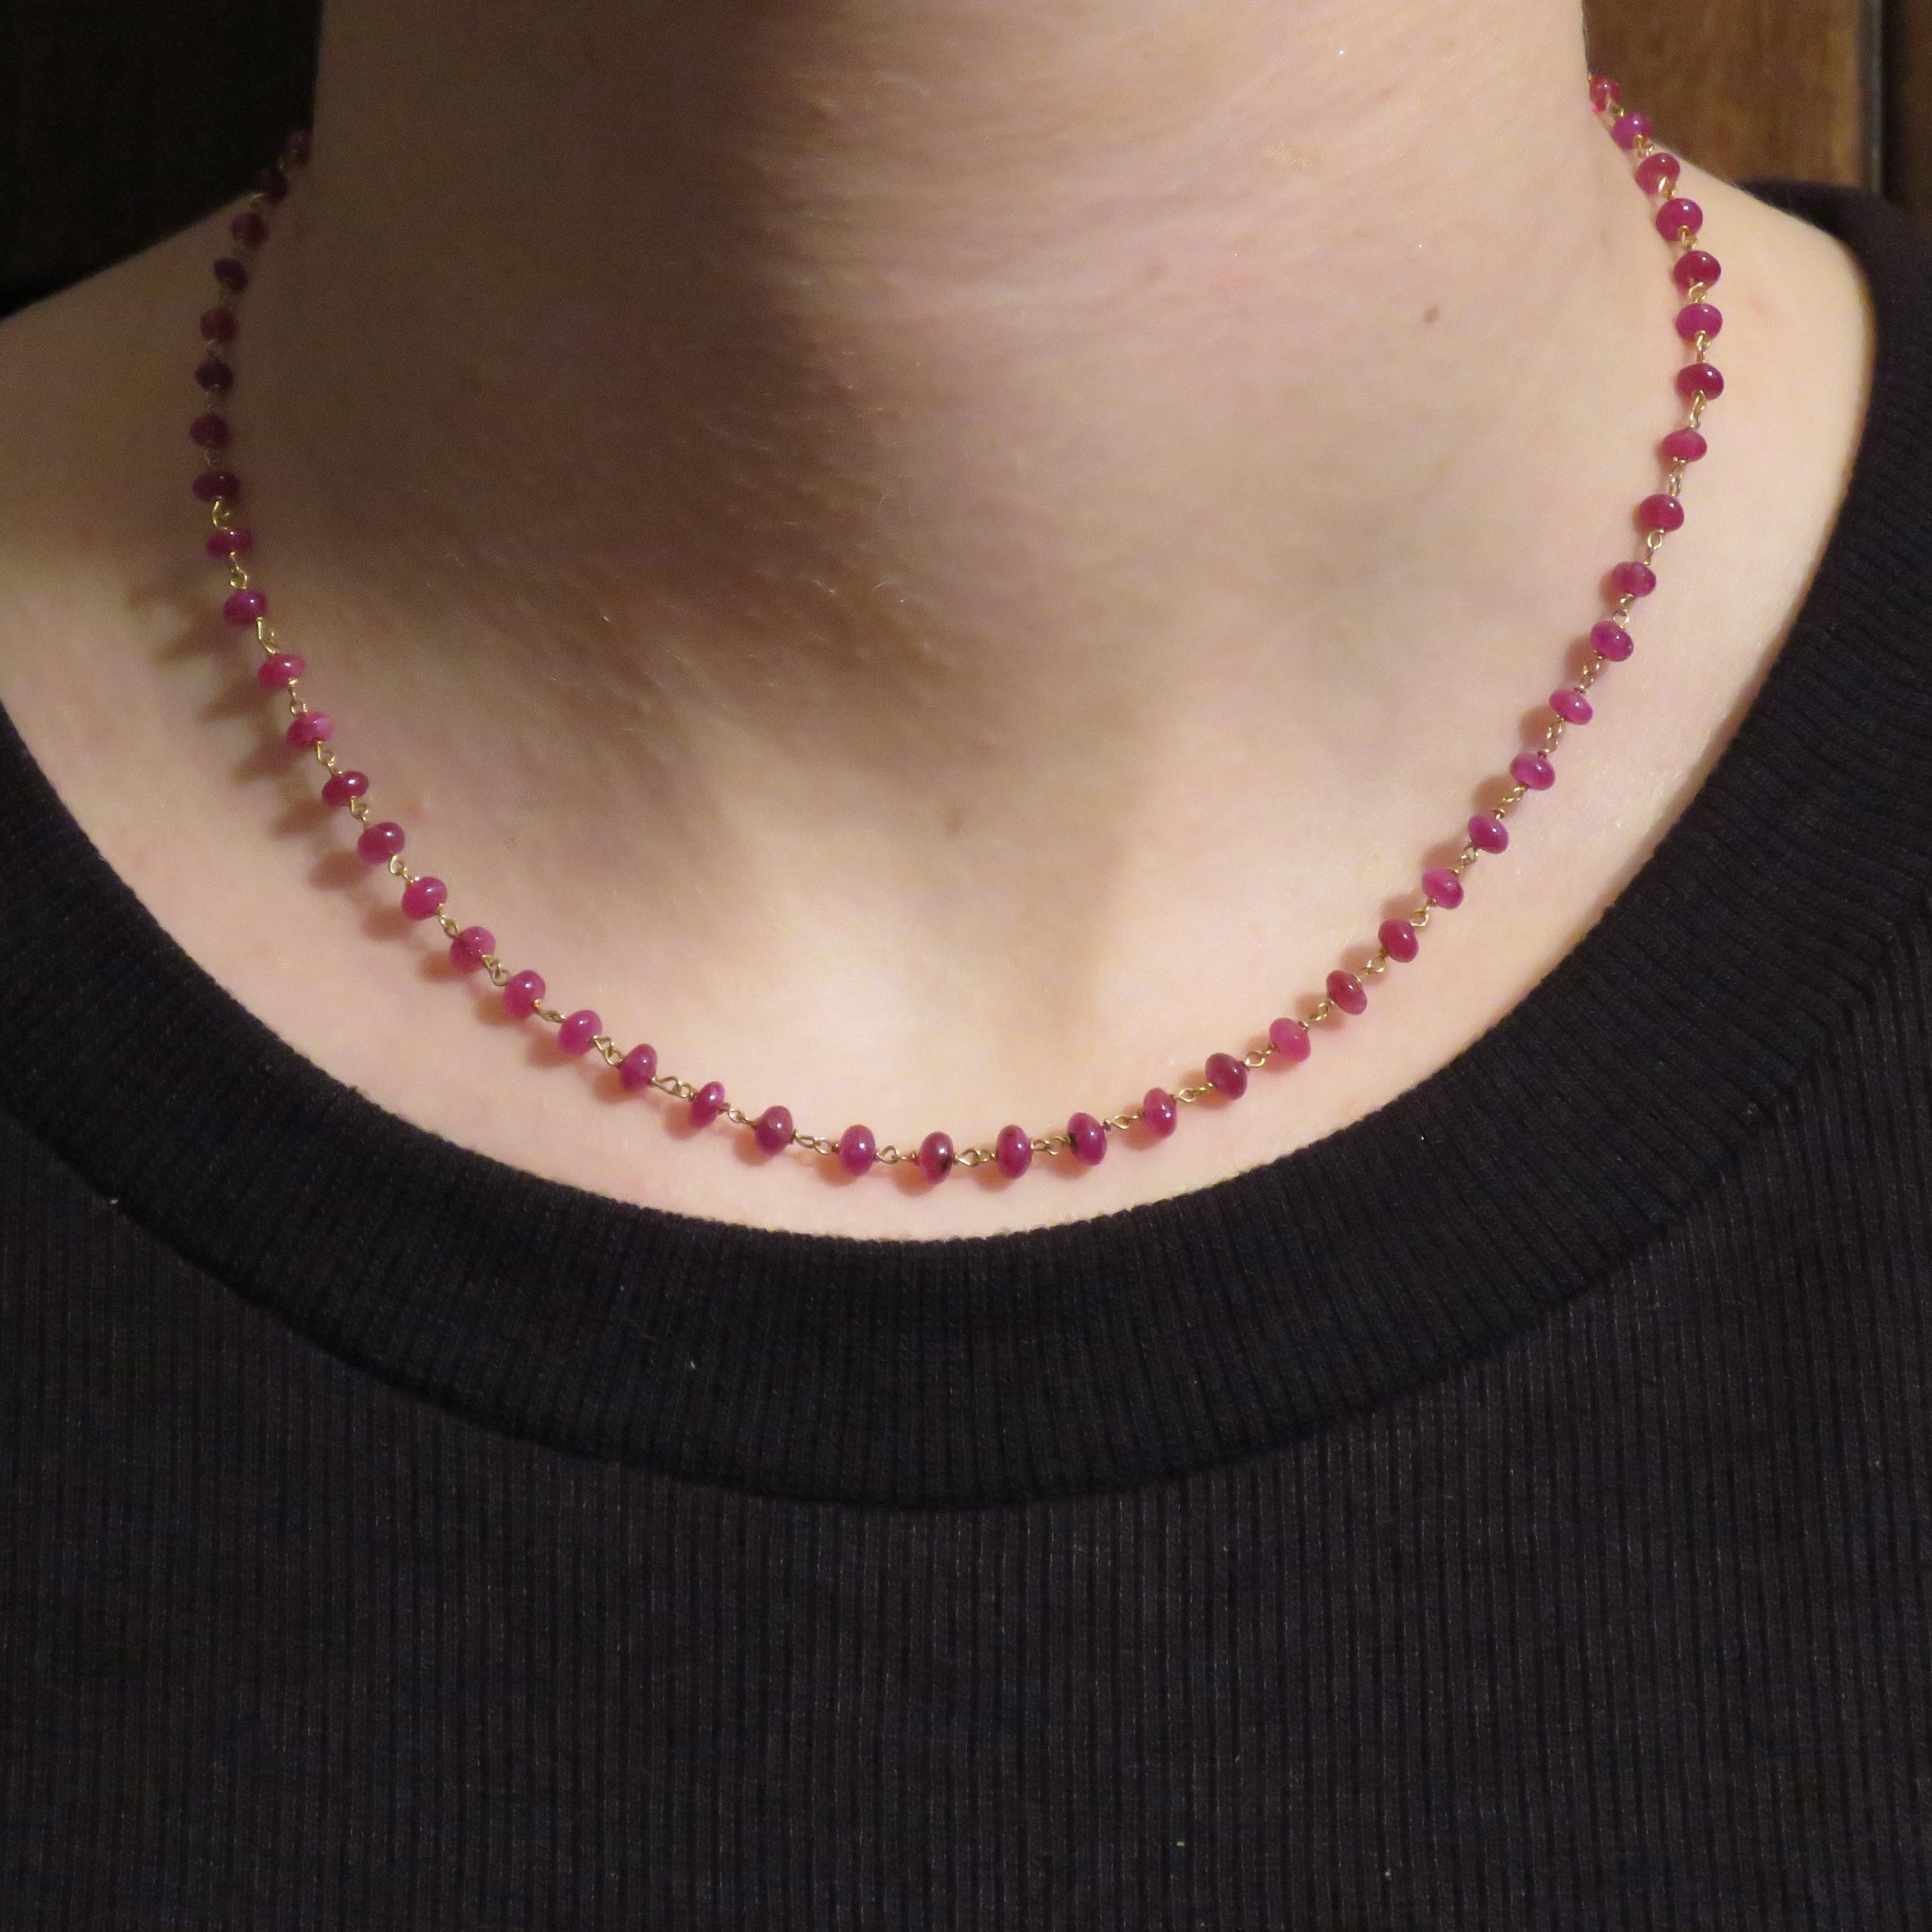 Bead Rubies 18 Karat Rose Gold Necklace Handcrafted in Italy 